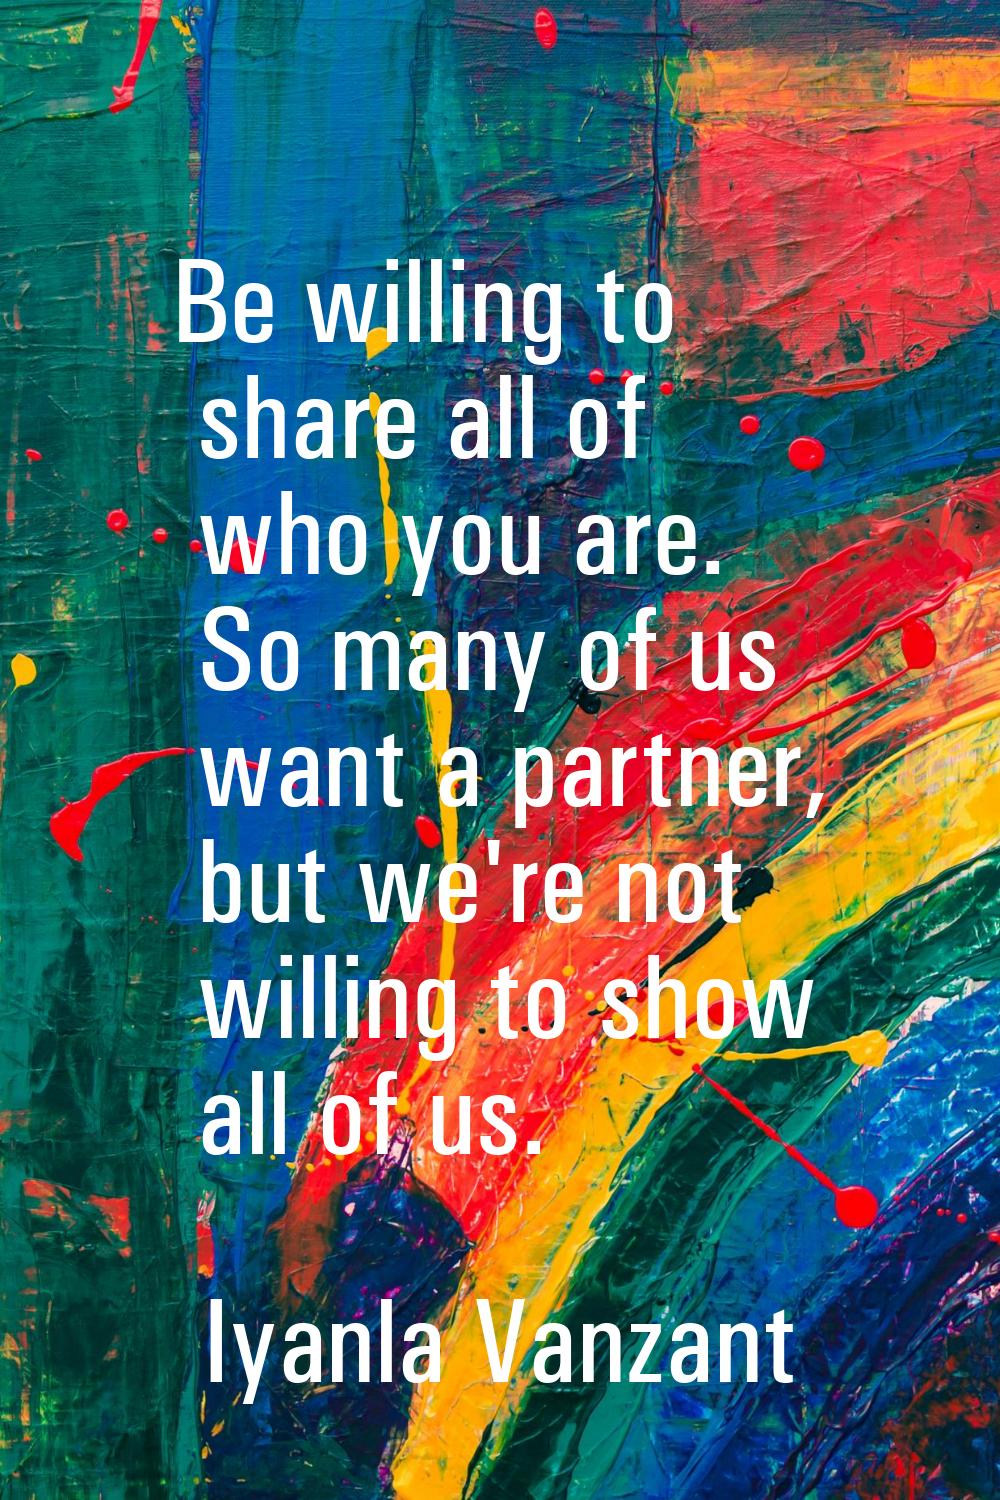 Be willing to share all of who you are. So many of us want a partner, but we're not willing to show